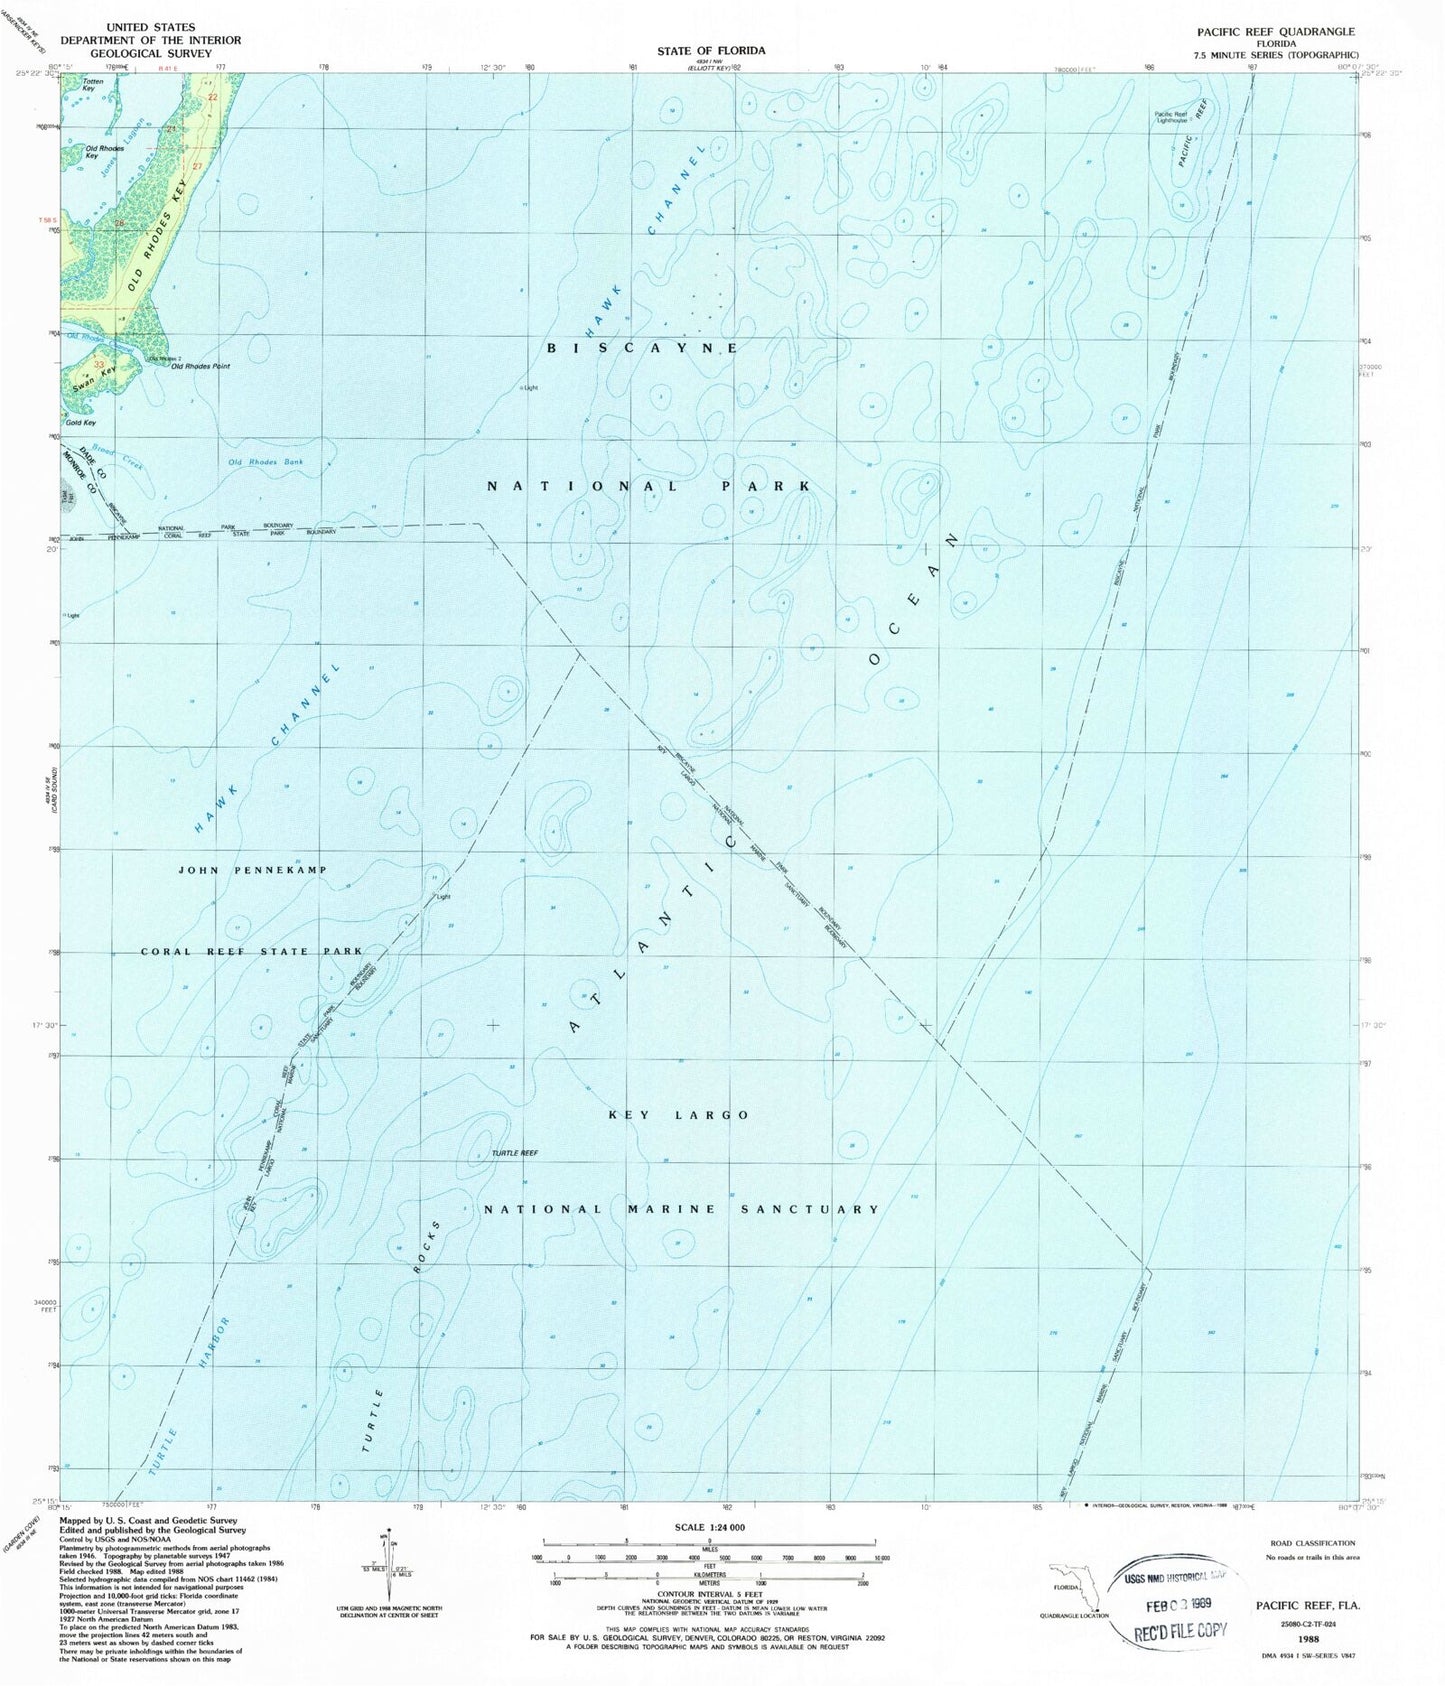 Classic USGS Pacific Reef Florida 7.5'x7.5' Topo Map Image